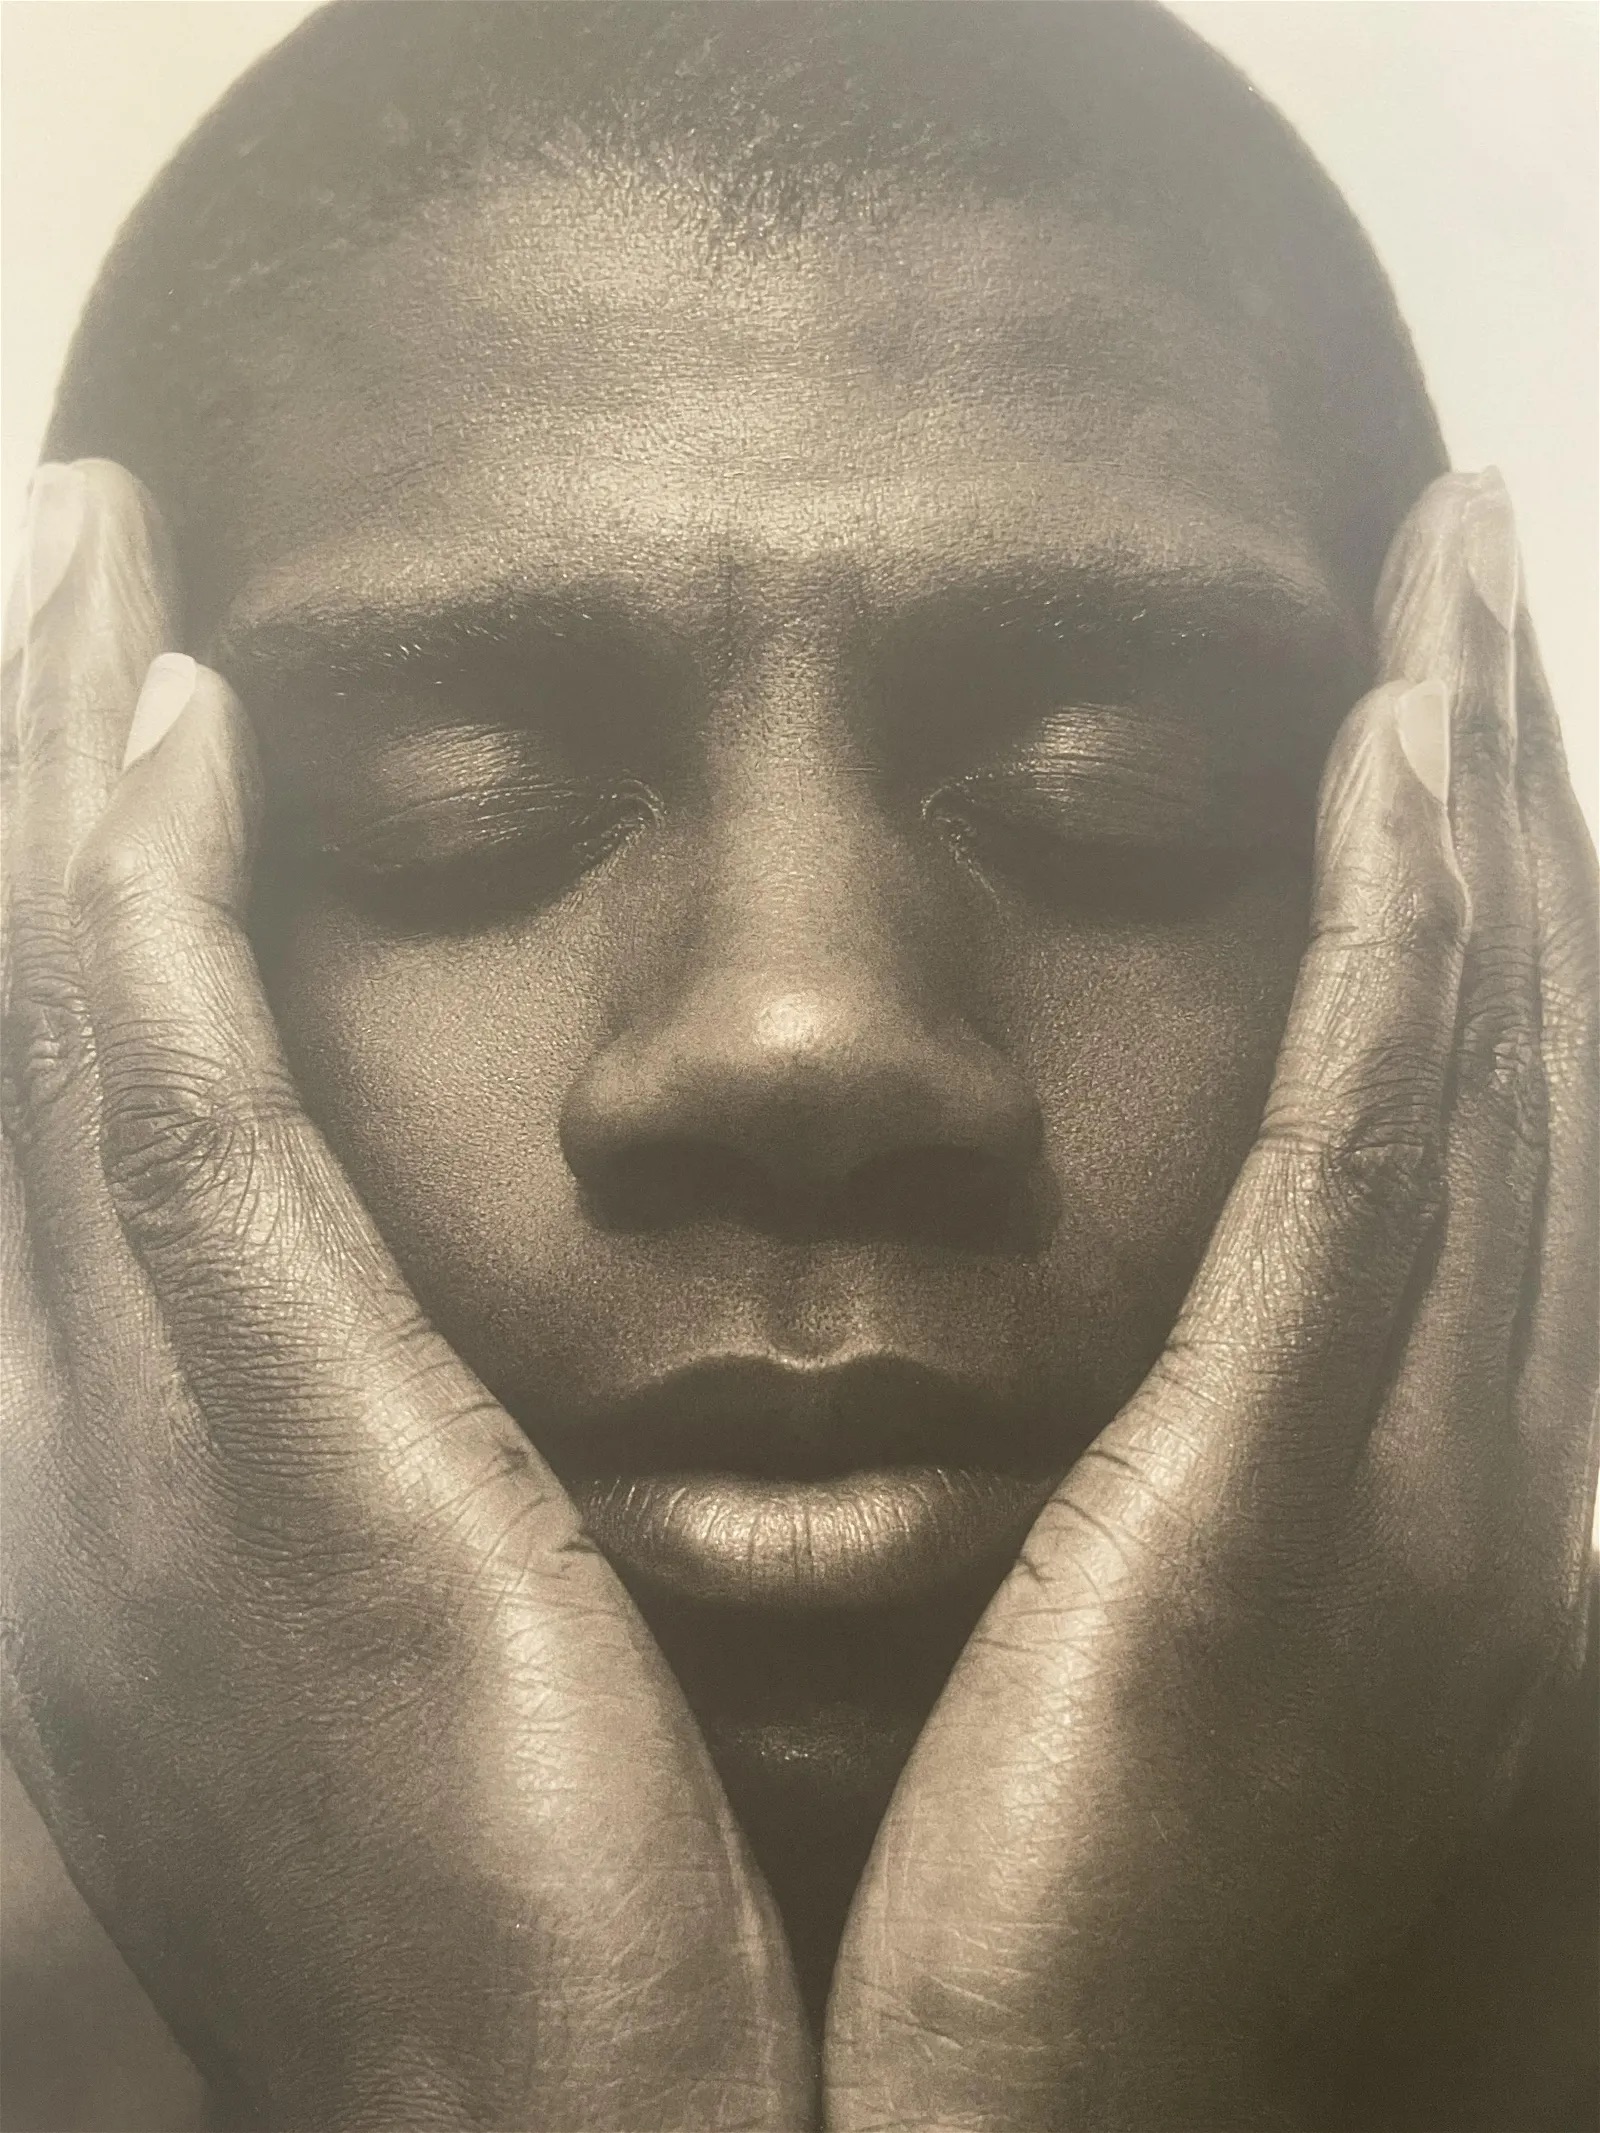 Herb Ritts "Earvin Magic Johnson, Hollywood" Print - Image 2 of 5